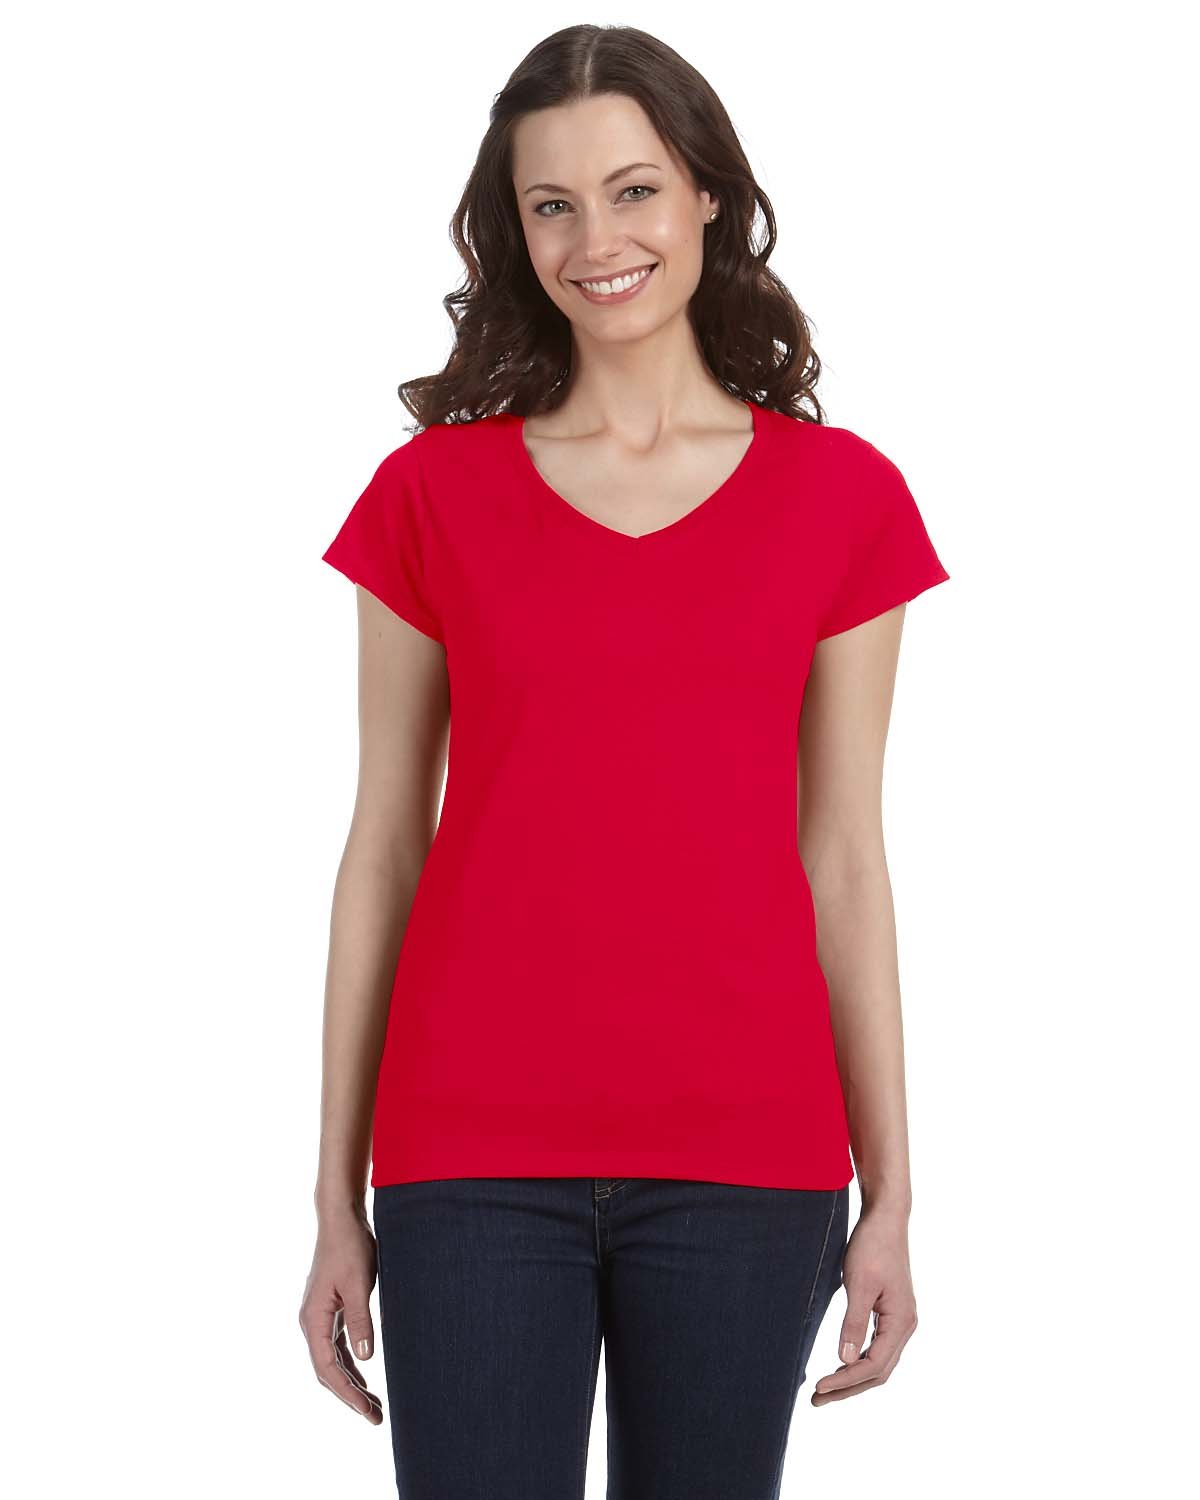 Gildan Ladies' SoftStyle®  Fitted V-Neck T-Shirt CHERRY RED 